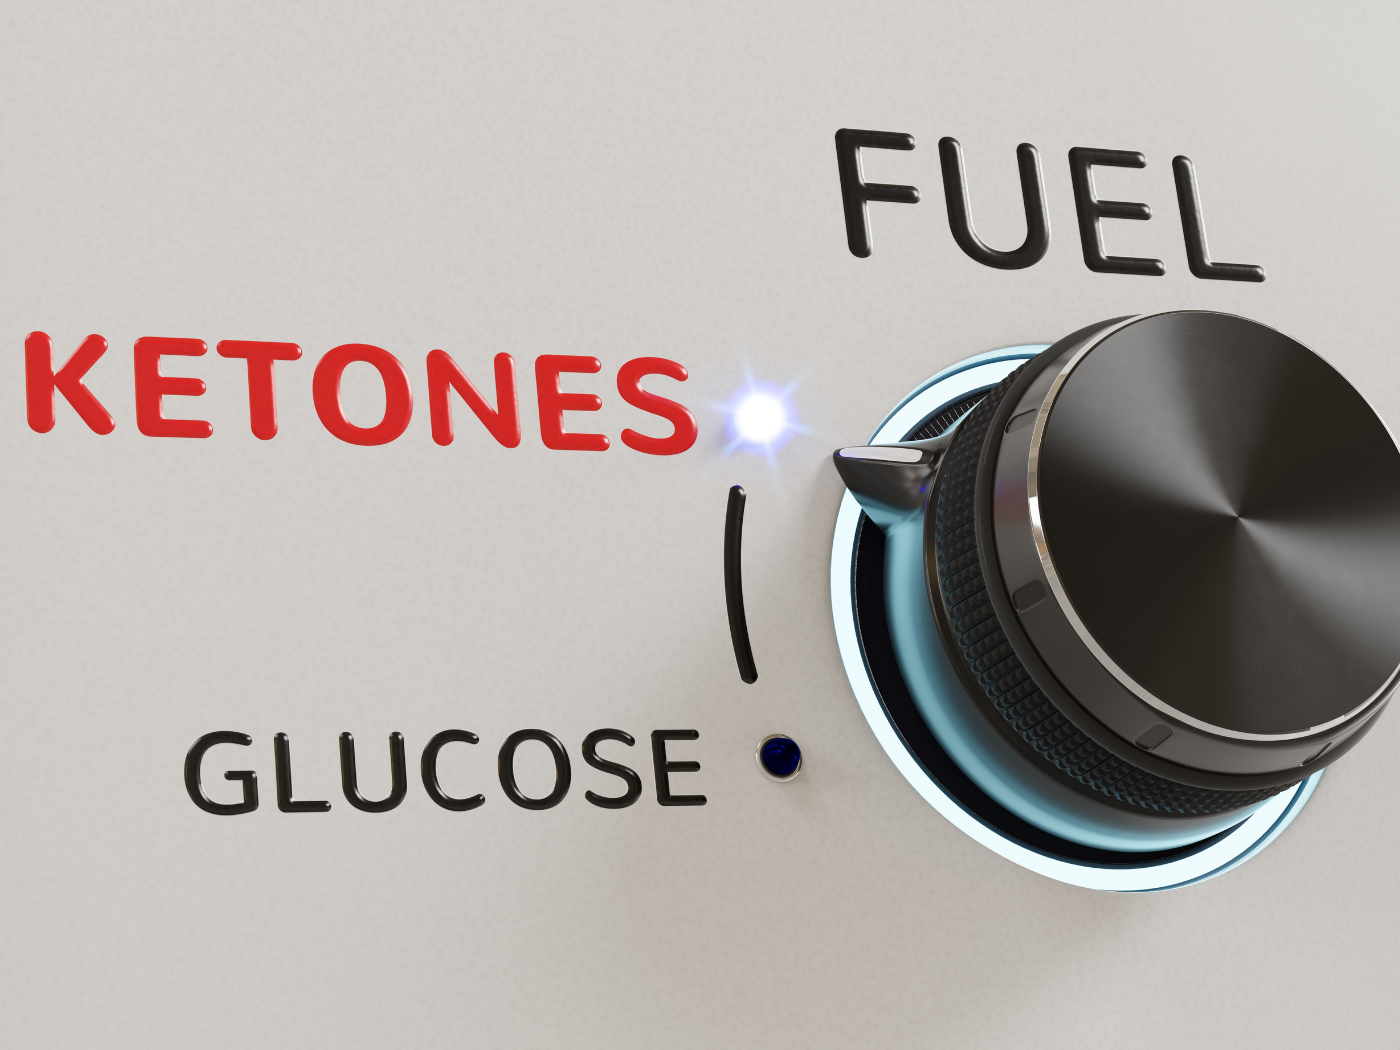 A Basic Guide to Blood Ketone Levels